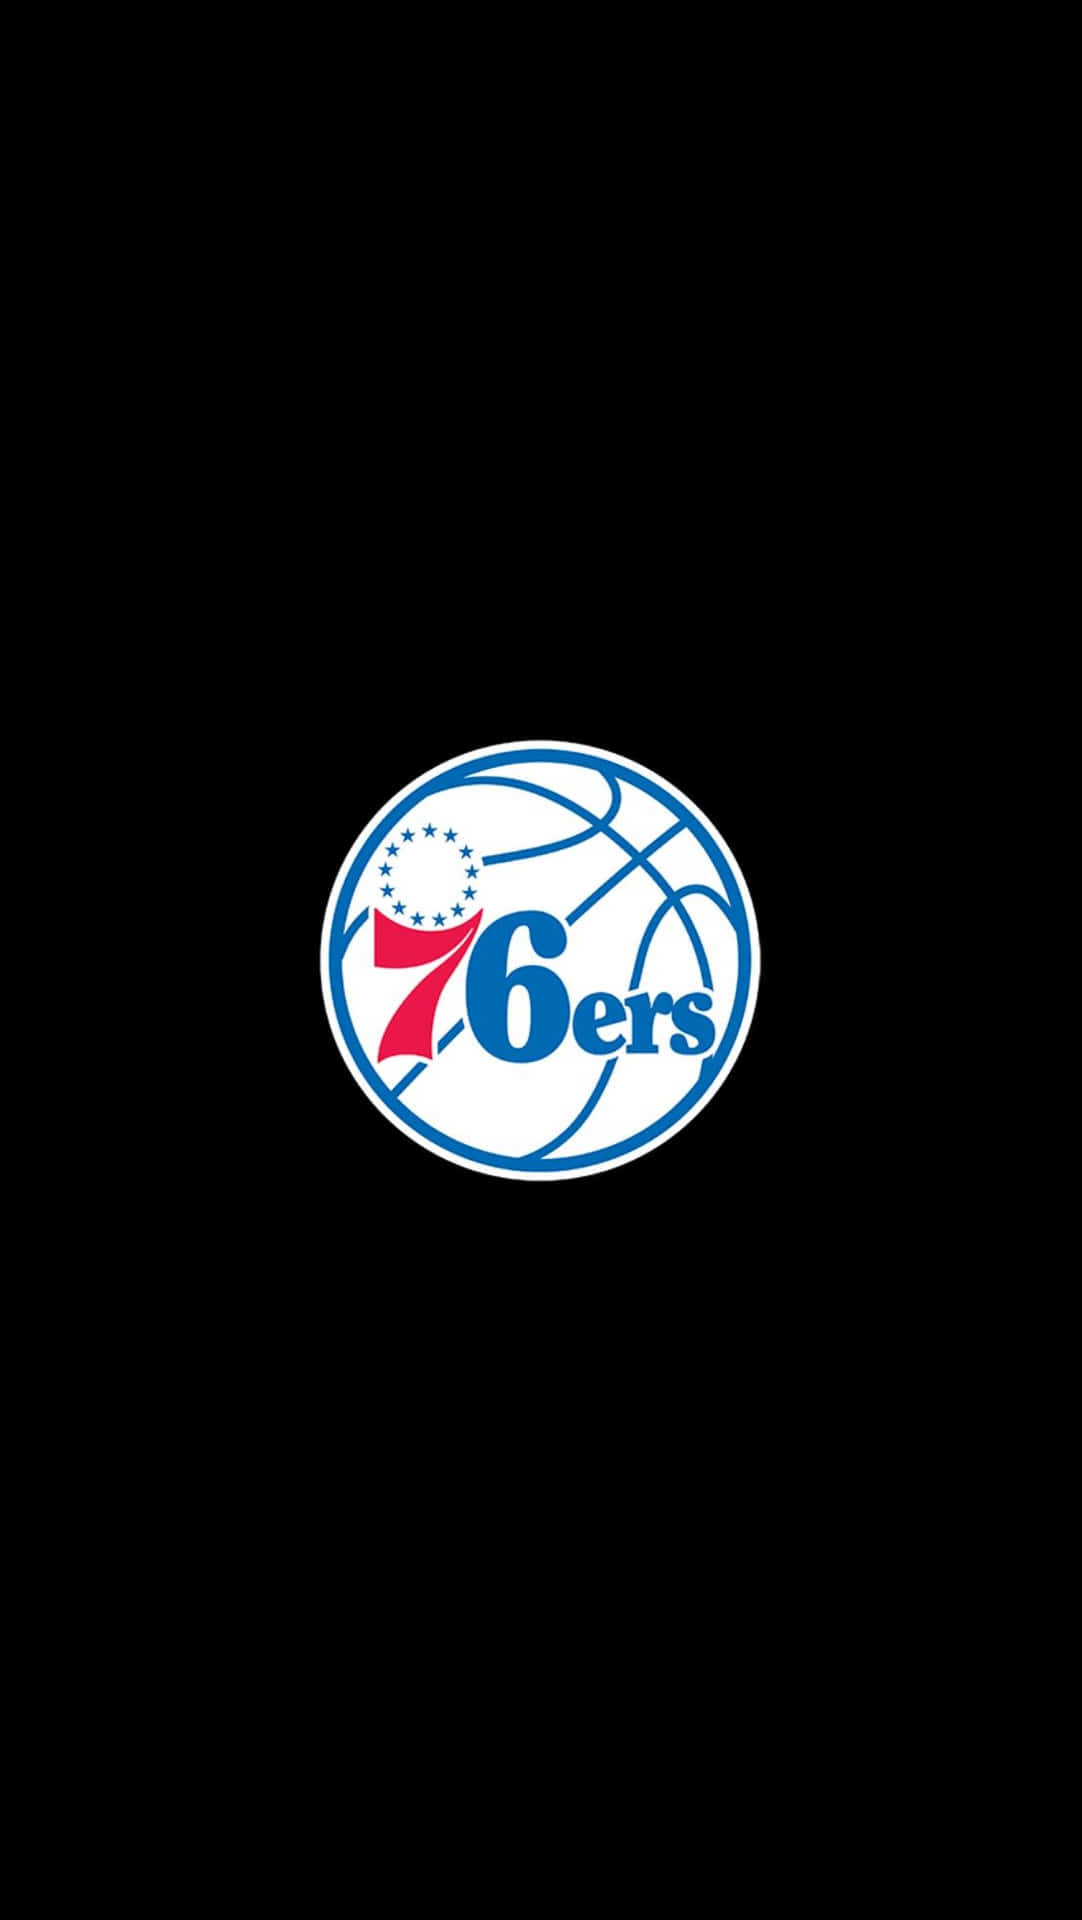 Download Show your 76ers pride with an official 76ers iPhone case Wallpaper   Wallpaperscom